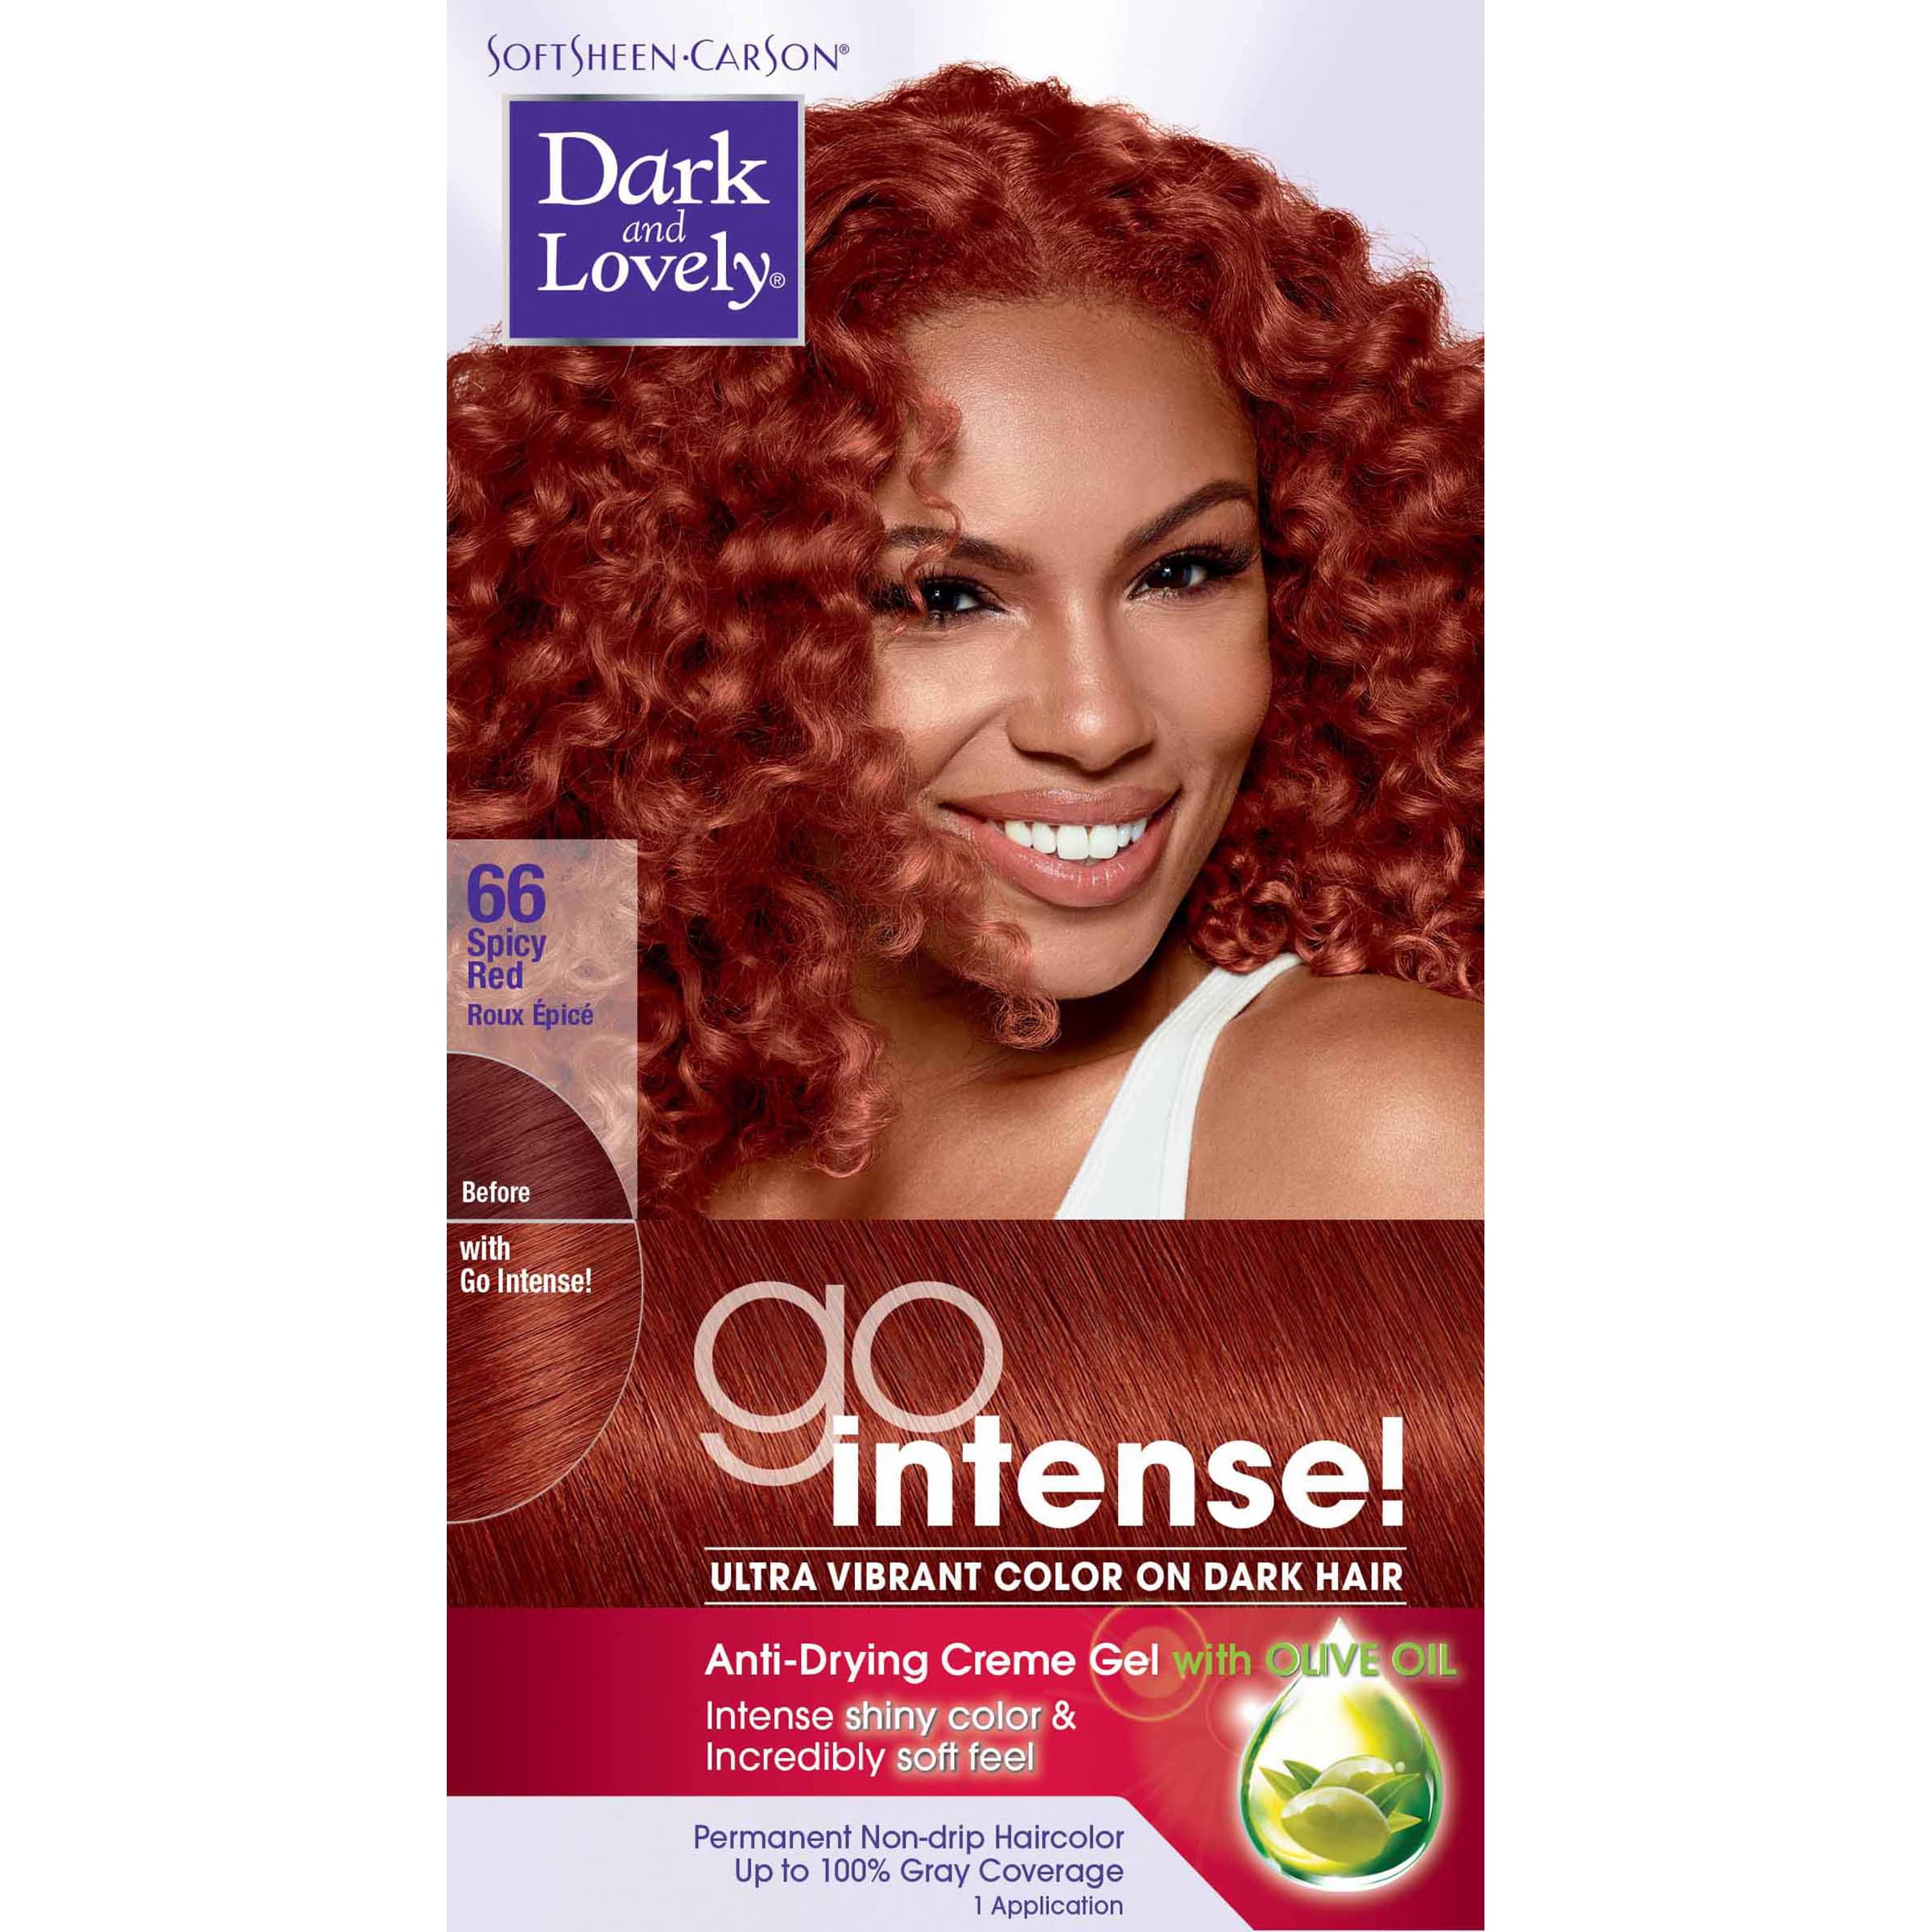 SoftSheen-Carson Dark and Lovely Go Intense Ultra Vibrant Hair Color on  Dark Hair, Permanent Hair Dye, Spicy Red 66 (Packaging May Vary) -  